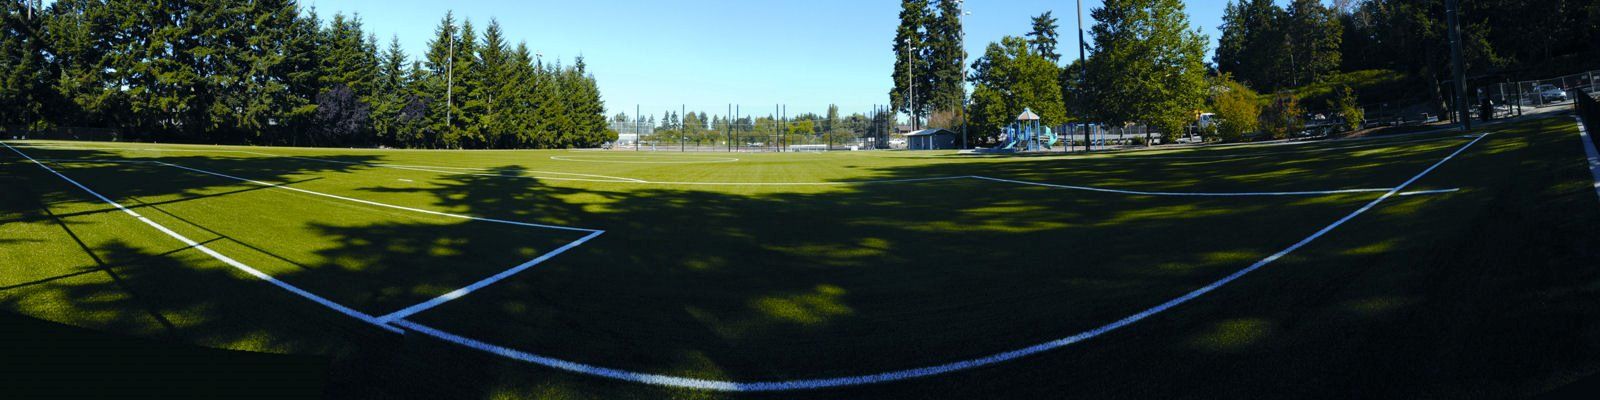 panorama image of newport hills park sports field during the day time.